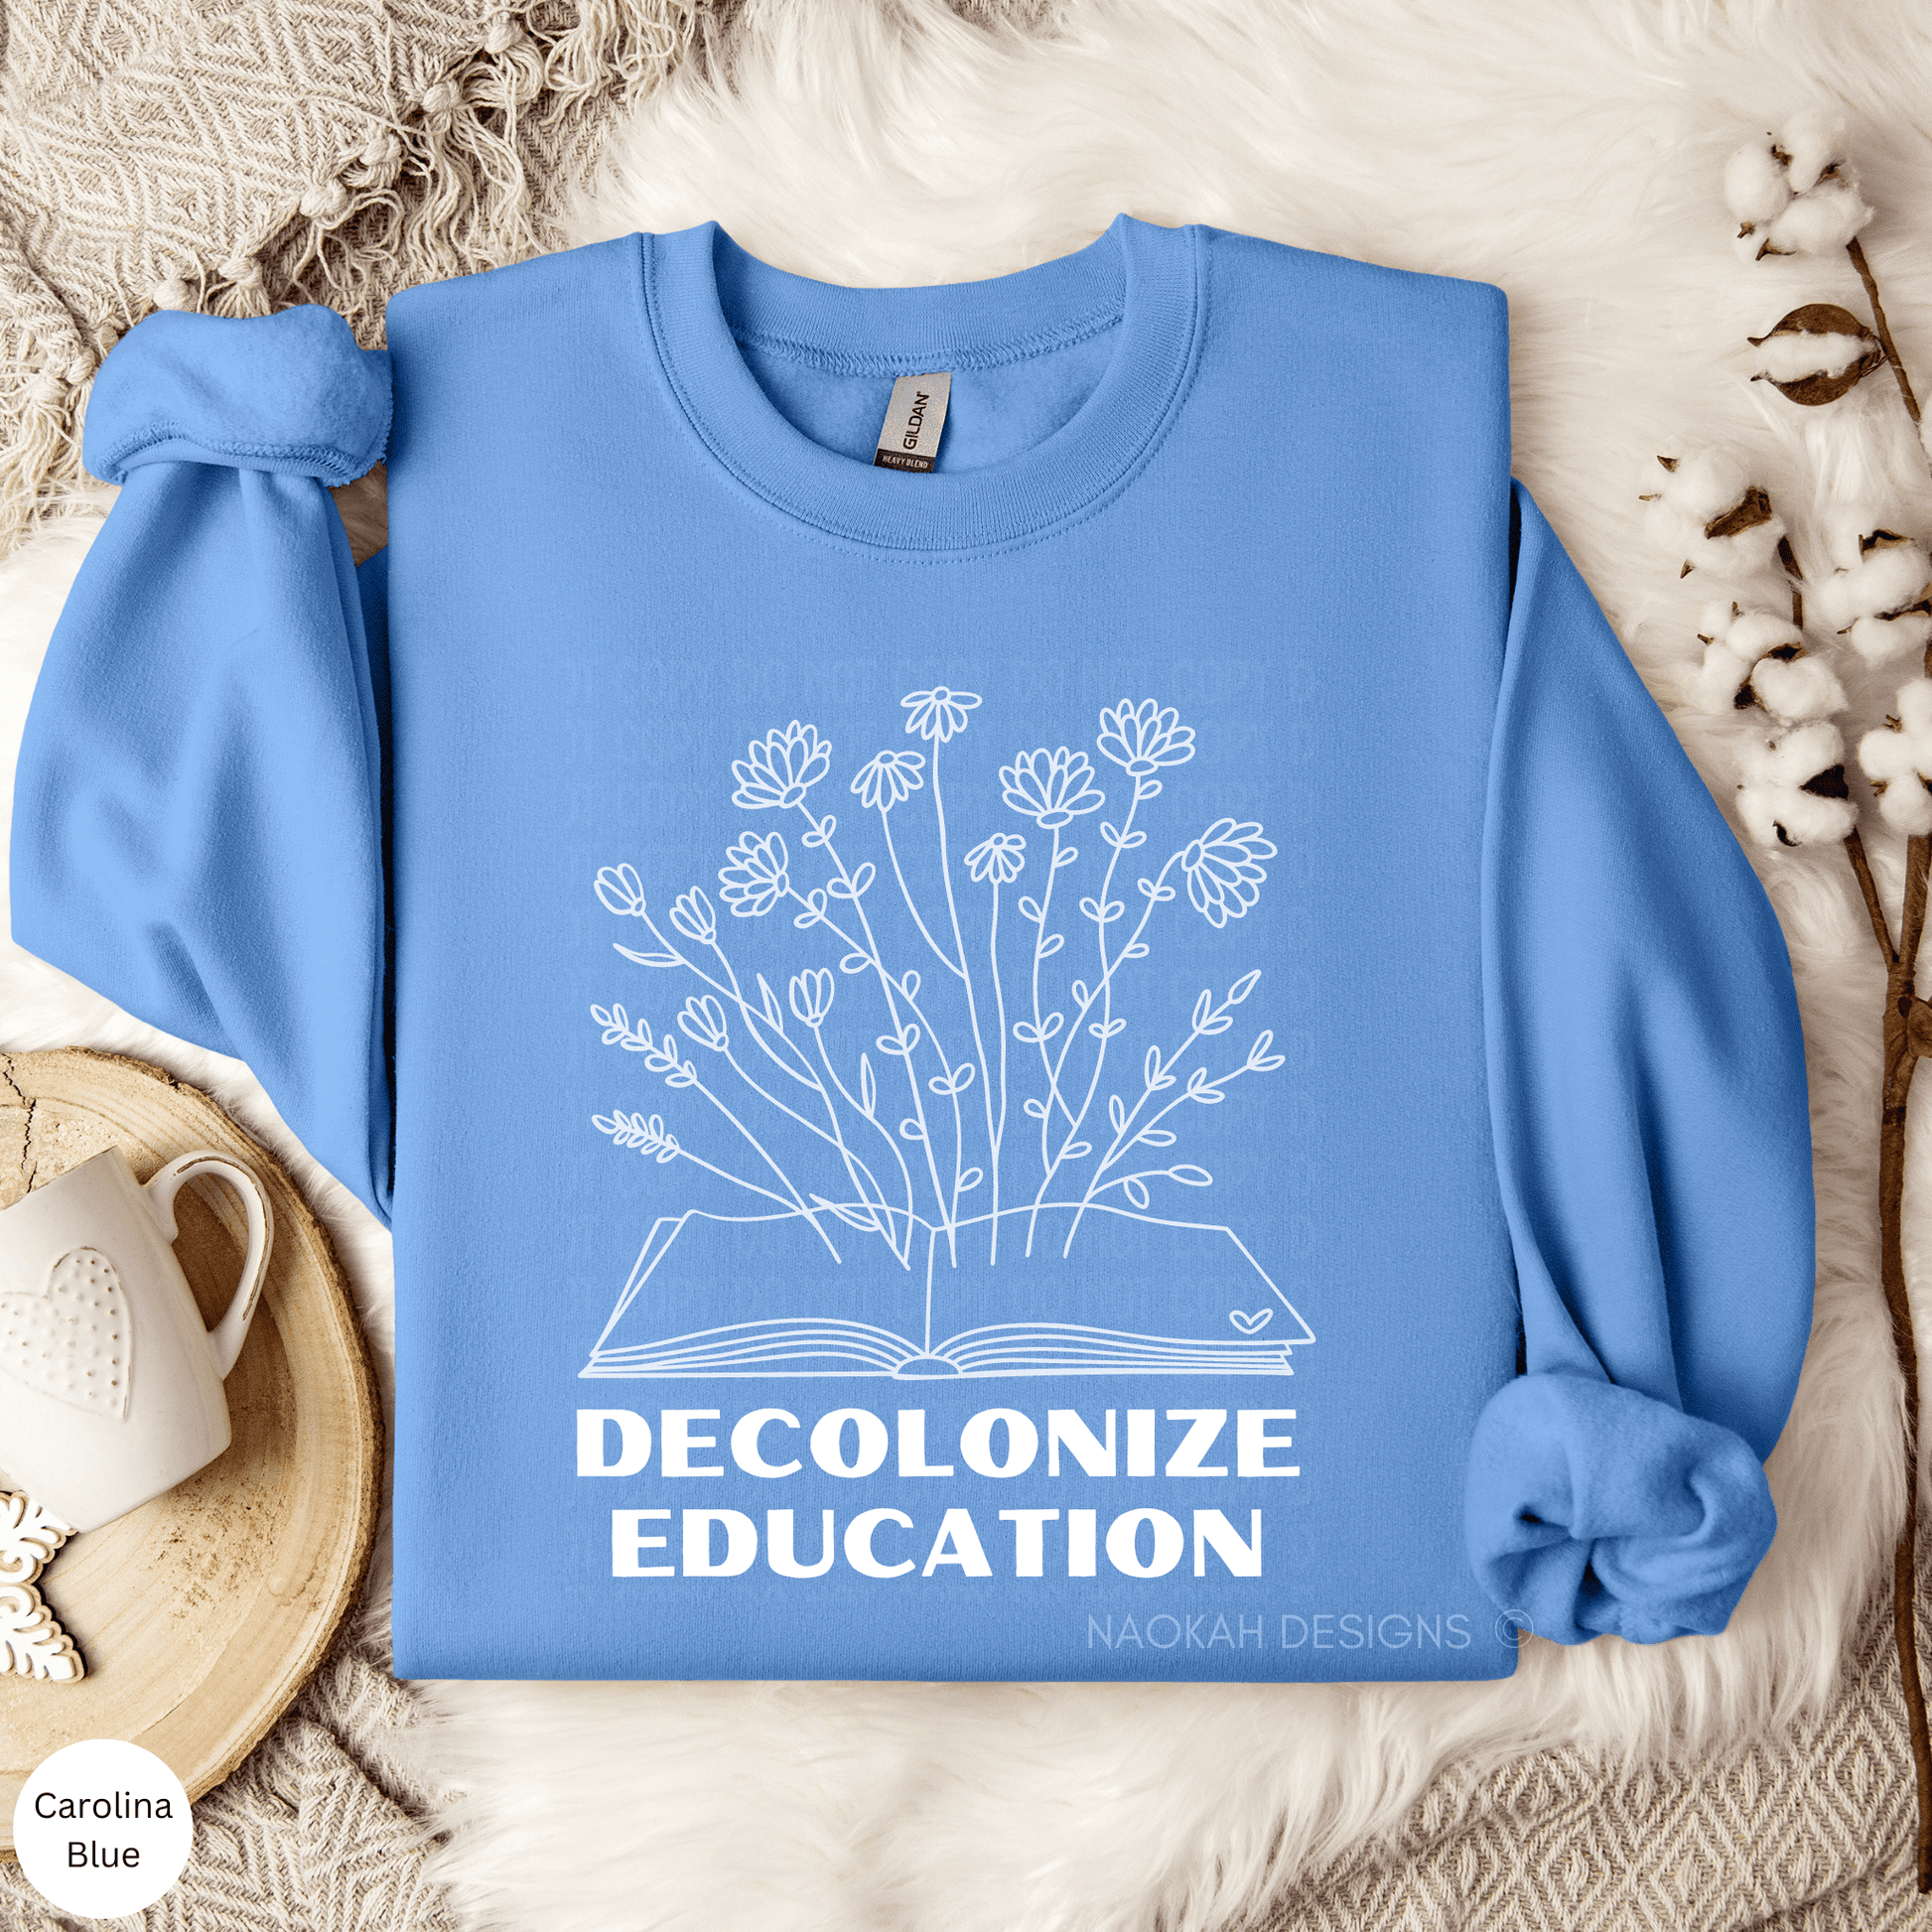 Decolonize Education Wildflower Book sweatshirt hoodie, Decolonize Shirt, Ancestral Teaching, Indigenous, Native Pride, You are on Native Land, You are on Indigenous Land, Colonialism, Native Teaching, Indigenous Owned, Anti racist, Anti Colonialism, Native American Shirt, Social Justice Shirt, No one is illegal, MMIW, decolonize anthropology, dismantle systems of oppression